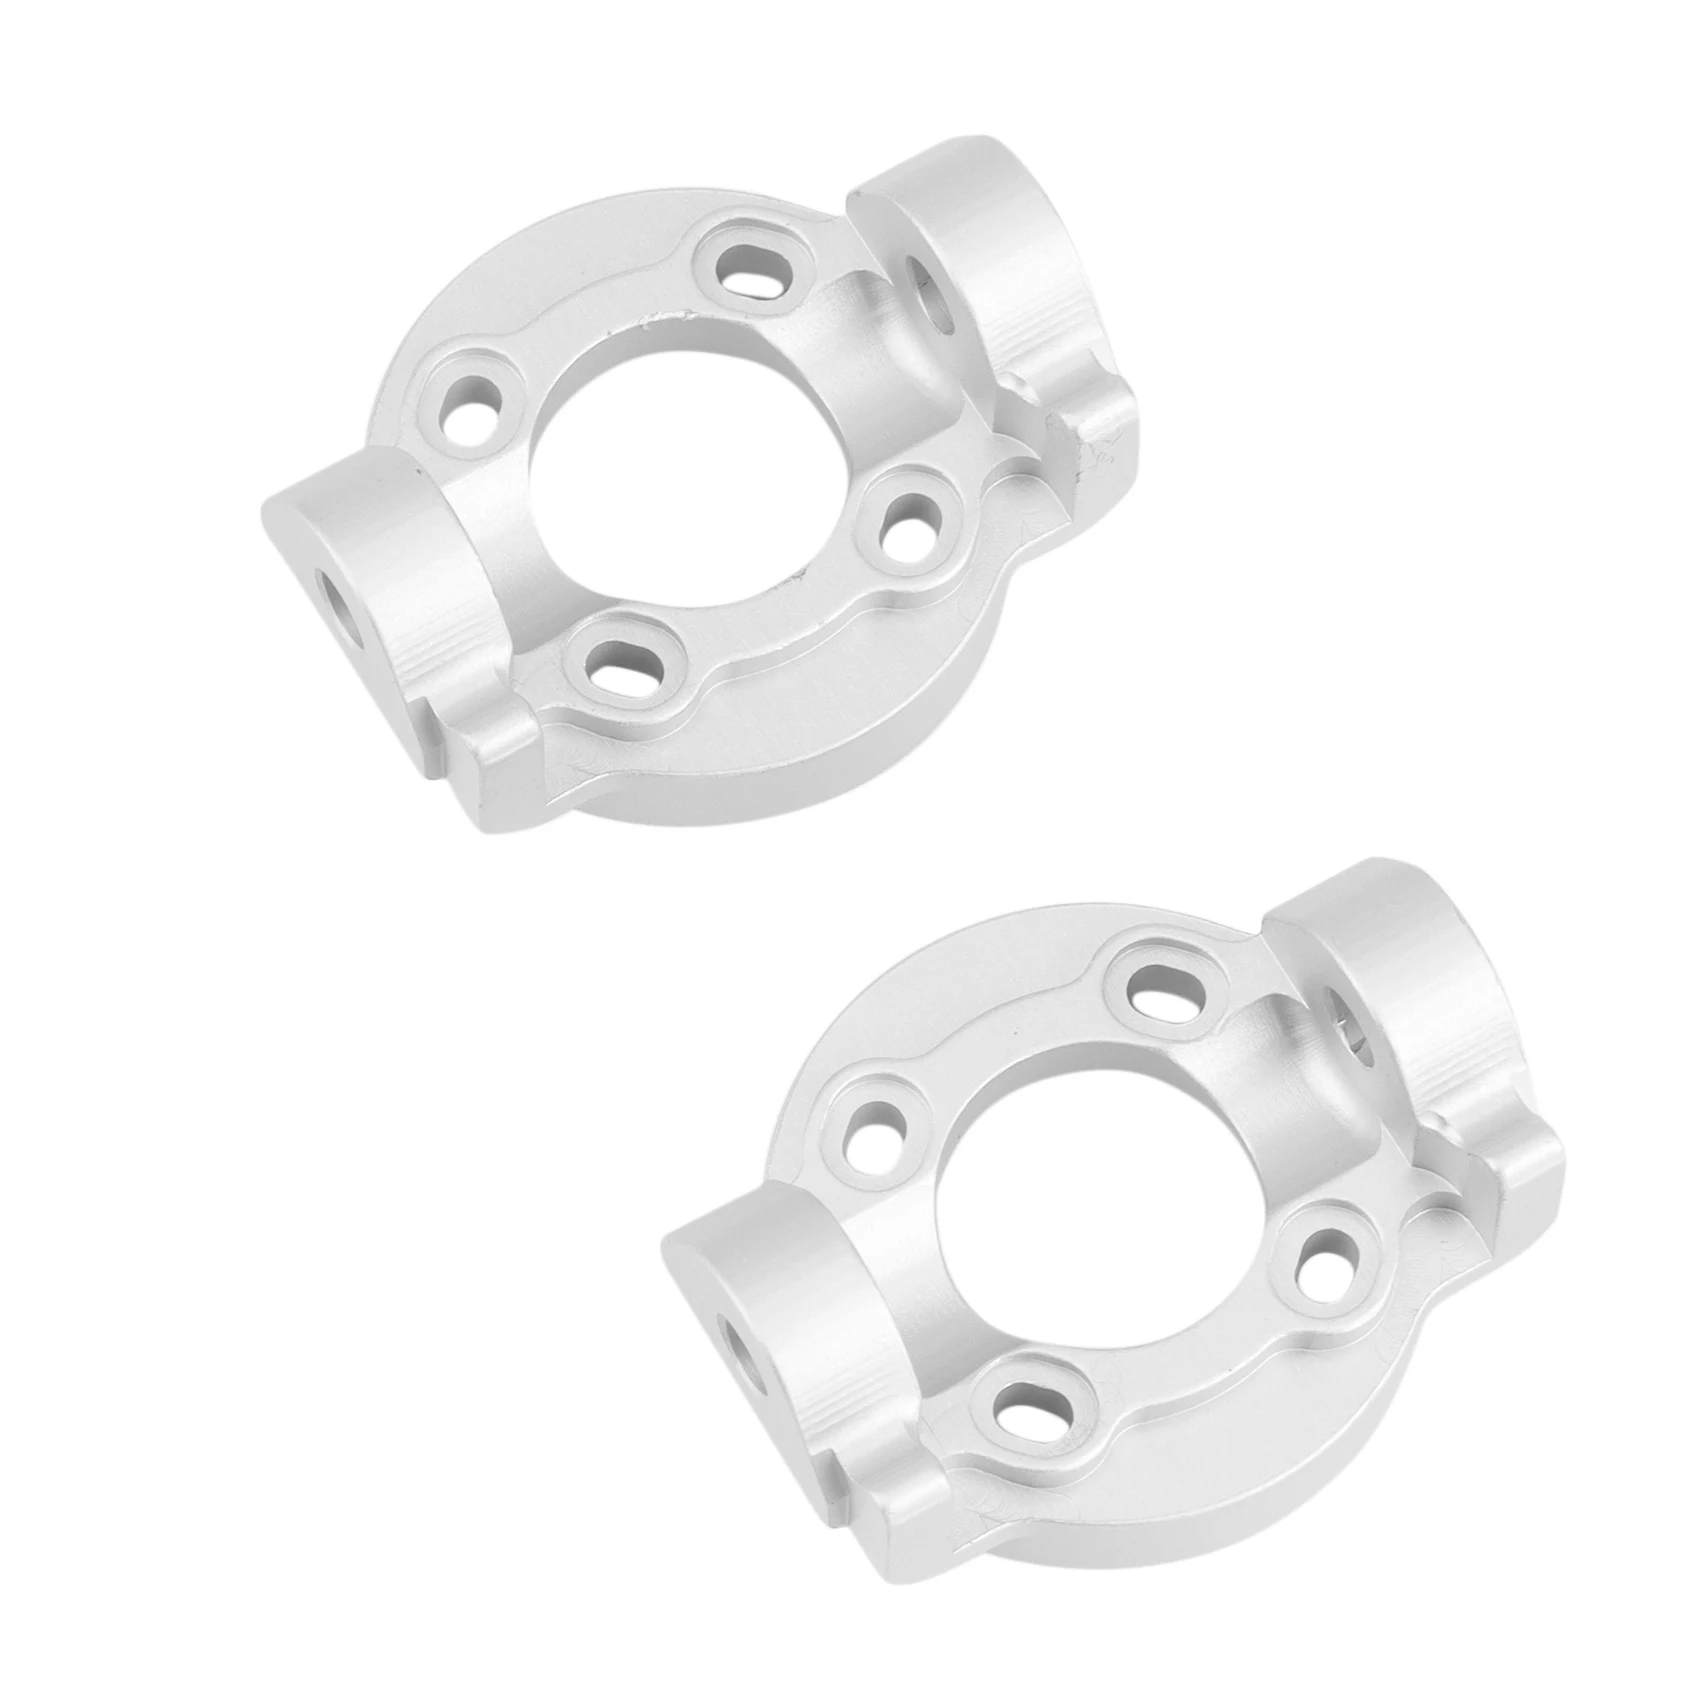 

2Pcs Metal C Hub Carrier Caster Block C Seat for LOSI LMT 4WD Solid Axle Monster Truck RC Car Upgrade Parts,Silver